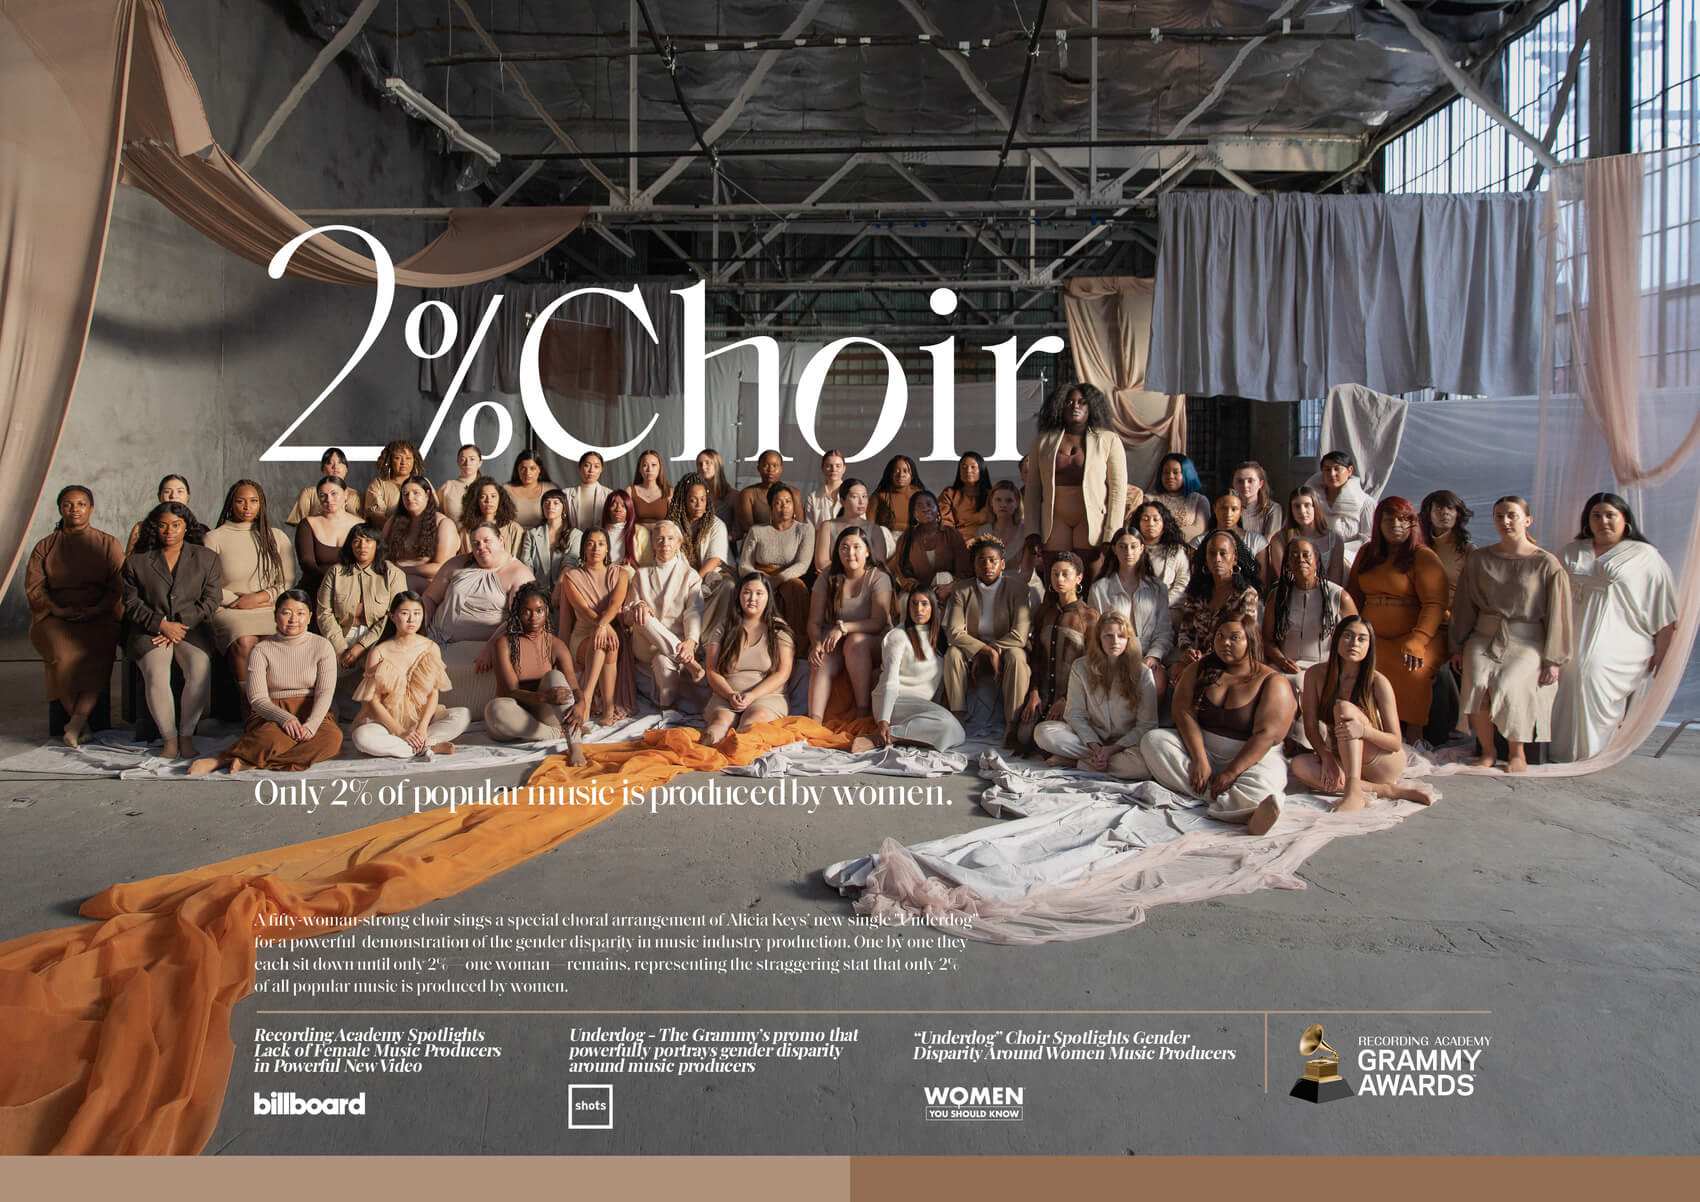 The Recording Academy, 2% Choir, Campaigns of the world